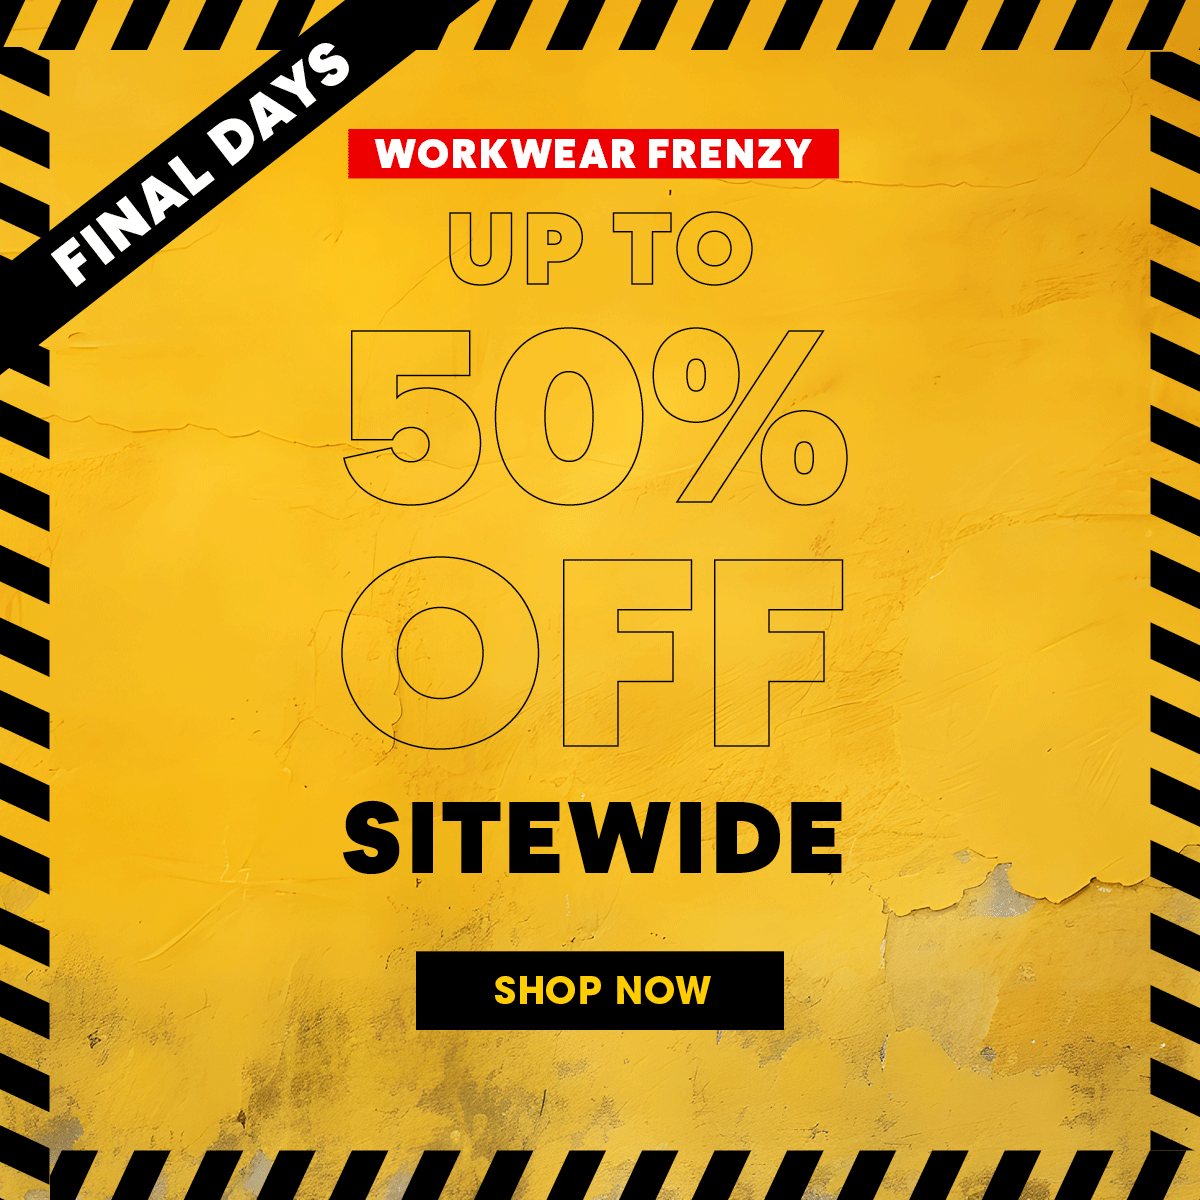 WORKWEAR FRENZY - UP TO 50% OFF SITEWIDE